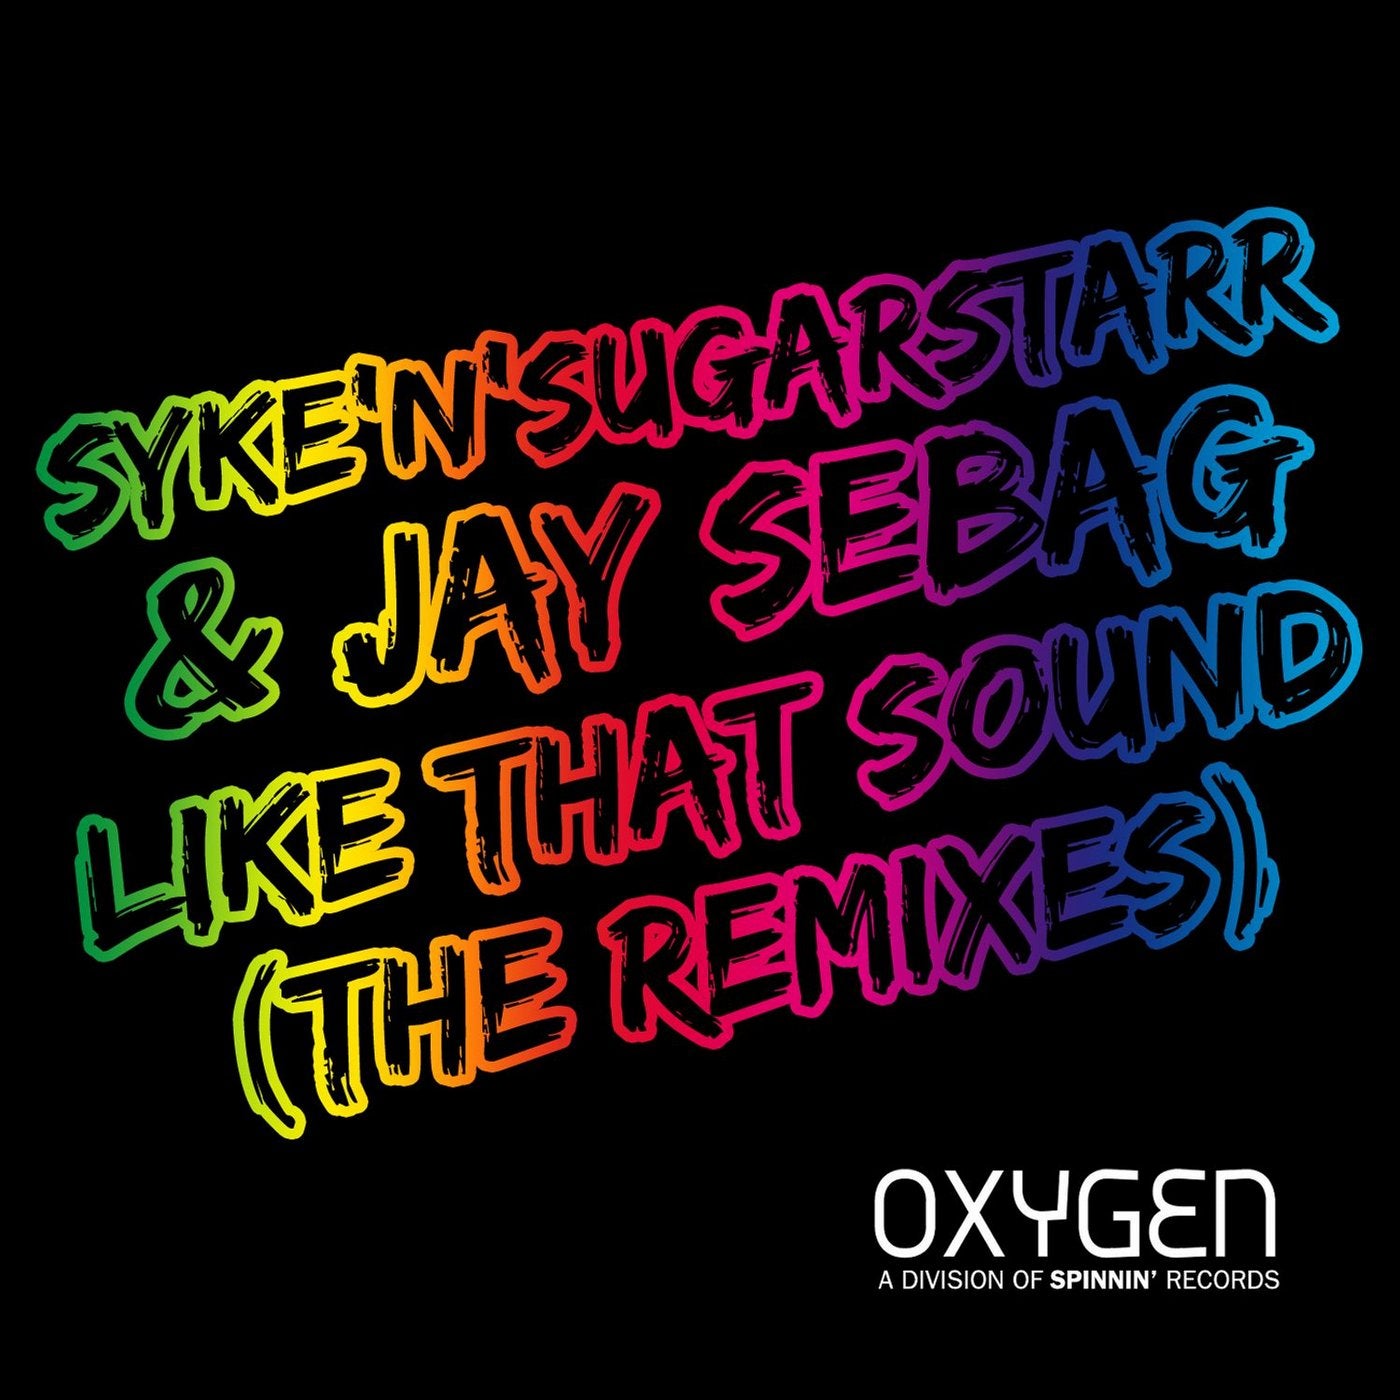 Like That Sound (The Remixes)